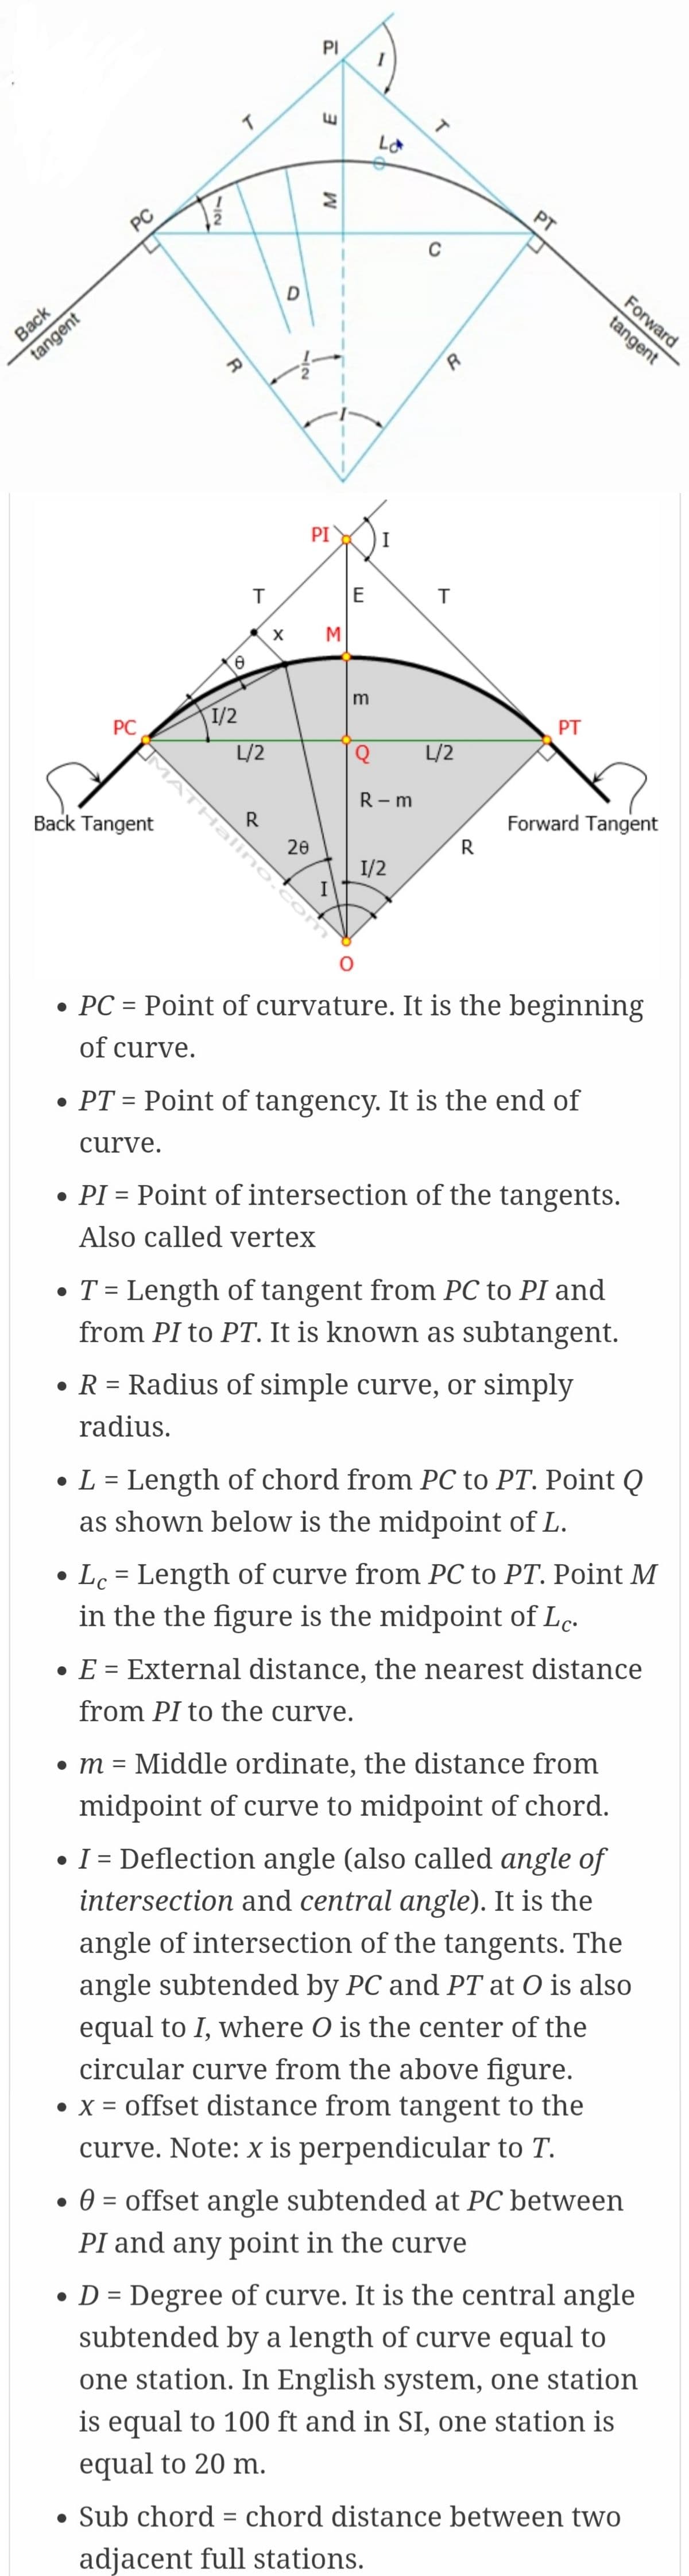 PI
PT
PC
C
Back
tangent
Forward
tangent
R
PI
I
M
I/2
PC
PT
L/2
L/2
R- m
Back Tangent
R
Forward Tangent
20
R
I/2
I
• PC = Point of curvature. It is the beginning
%3D
of curve.
• PT = Point of tangency. It is the end of
curve.
• PI = Point of intersection of the tangents.
%3D
Also called vertex
• T = Length of tangent from PC to PI and
from PI to PT. It is known as subtangent.
• R = Radius of simple curve, or simply
radius.
• L = Length of chord from PC to PT. Point Q
as shown below is the midpoint of L.
%3D
Lc = Length of curve from PC to PT. Point M
in the the figure is the midpoint of Lc.
• E = External distance, the nearest distance
%3D
from PI to the curve.
• m = Middle ordinate, the distance from
midpoint of curve to midpoint of chord.
I = Deflection angle (also called angle of
intersection and central angle). It is the
%3D
angle of intersection of the tangents. The
angle subtended by PC and PT at O is also
equal to I, where O is the center of the
circular curve from the above figure.
• x = offset distance from tangent to the
curve. Note: x is perpendicular to T.
• 0 = offset angle subtended at PC between
PI and any point in the curve
D = Degree of curve. It is the central angle
subtended by a length of curve equal to
one station. In English system, one station
is equal to 100 ft and in SI, one station is
%3D
equal to 20 m.
• Sub chord = chord distance between two
adjacent full stations.
12
UMATHalino.com
